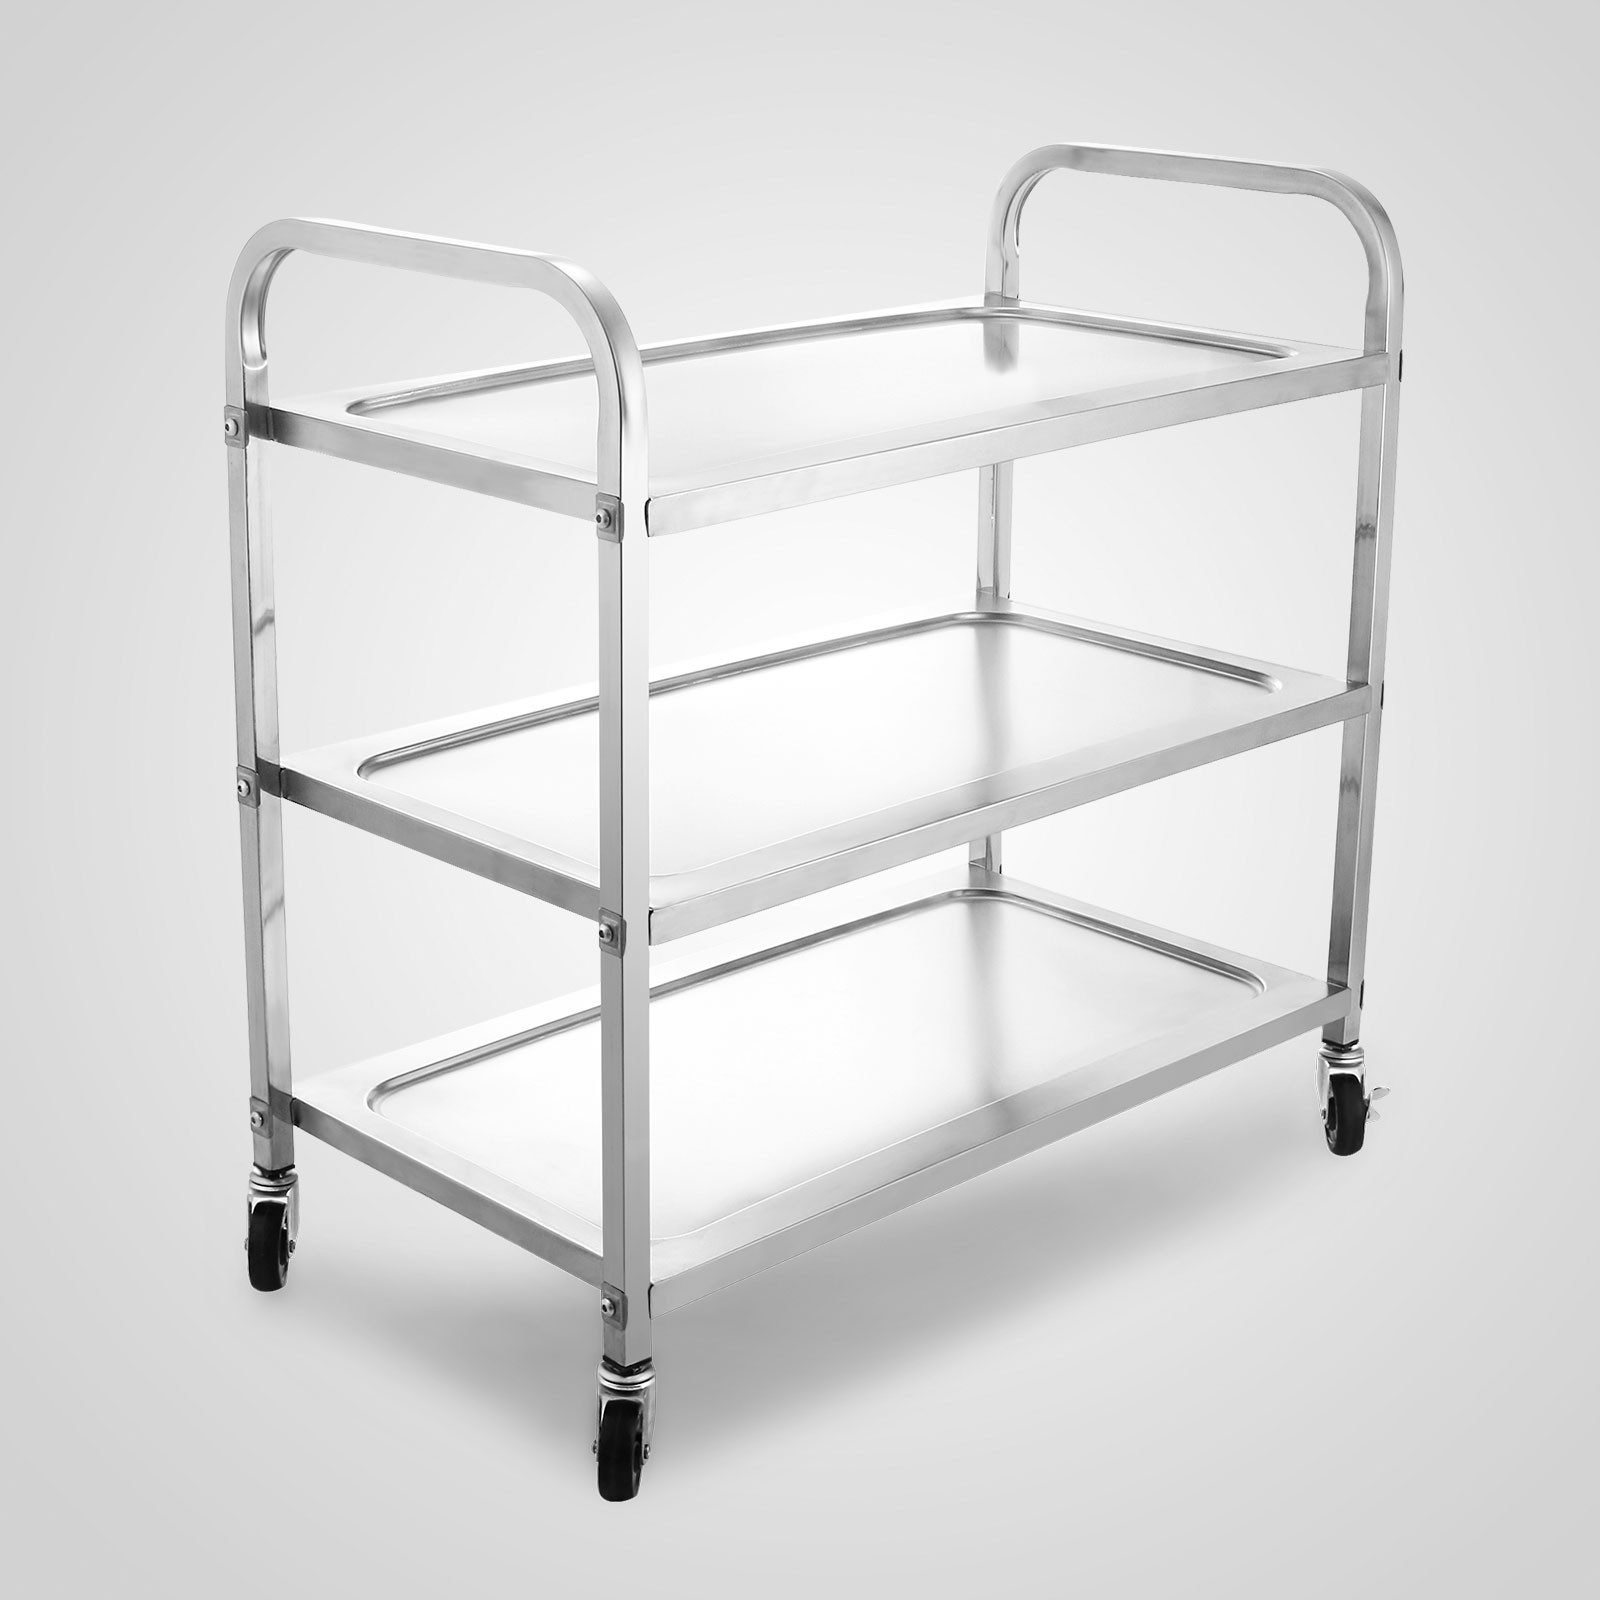 Utility Cart 3 Shelf Utility Cart on Wheels 330Lbs Stainless Steel Stainless Steel Laundry Cart With Wheels